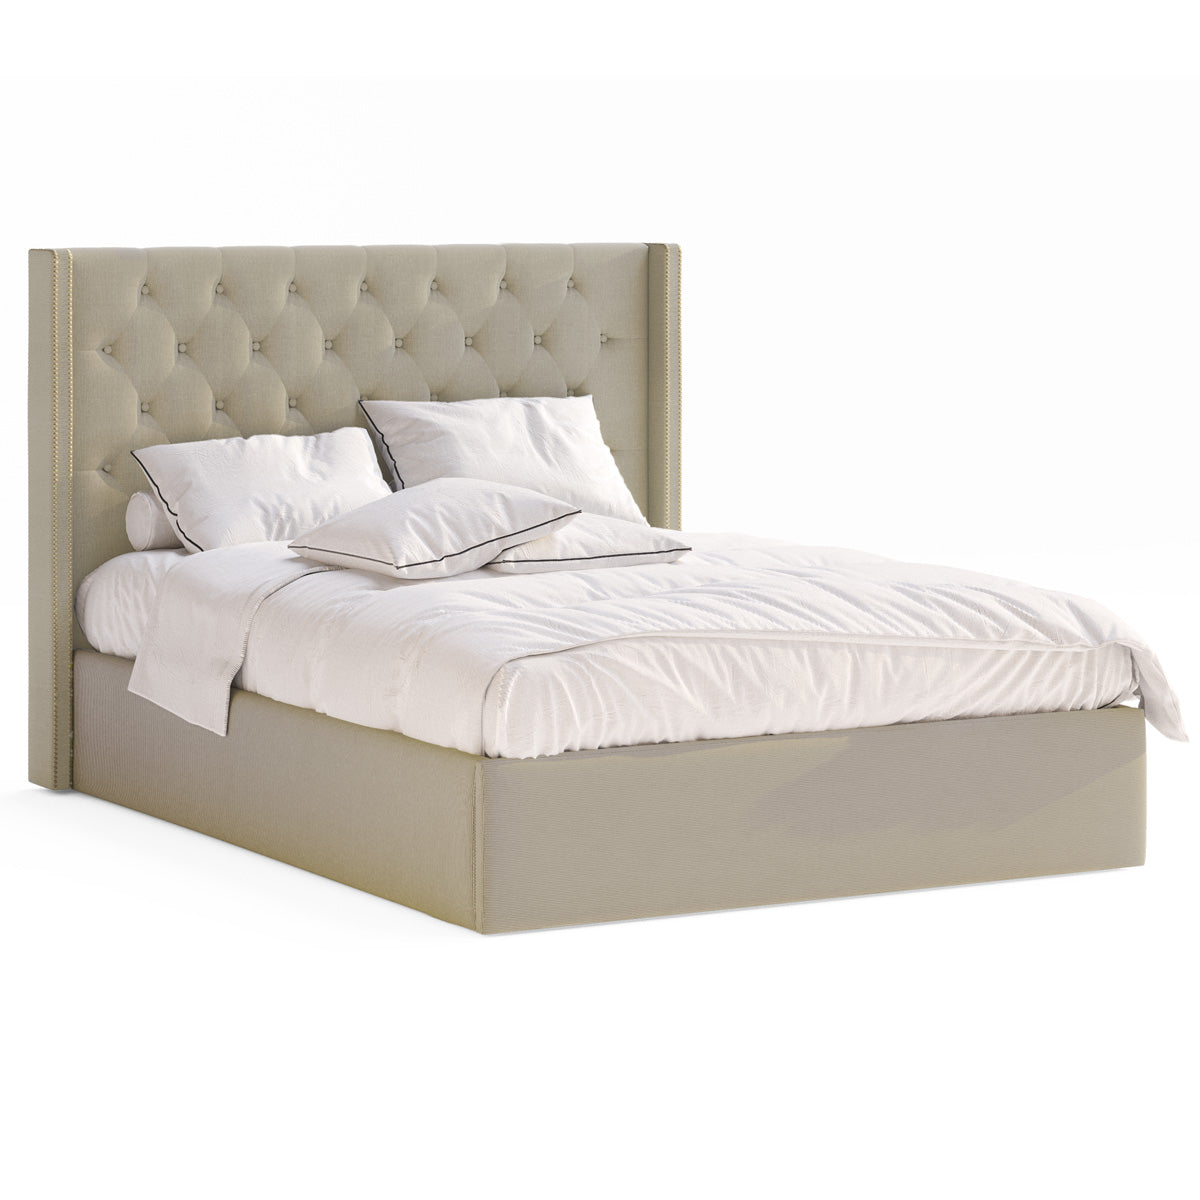 Giselle Gas Lift Storage Wing Bed Frame with Studs (Tuscan Beige Fabric)